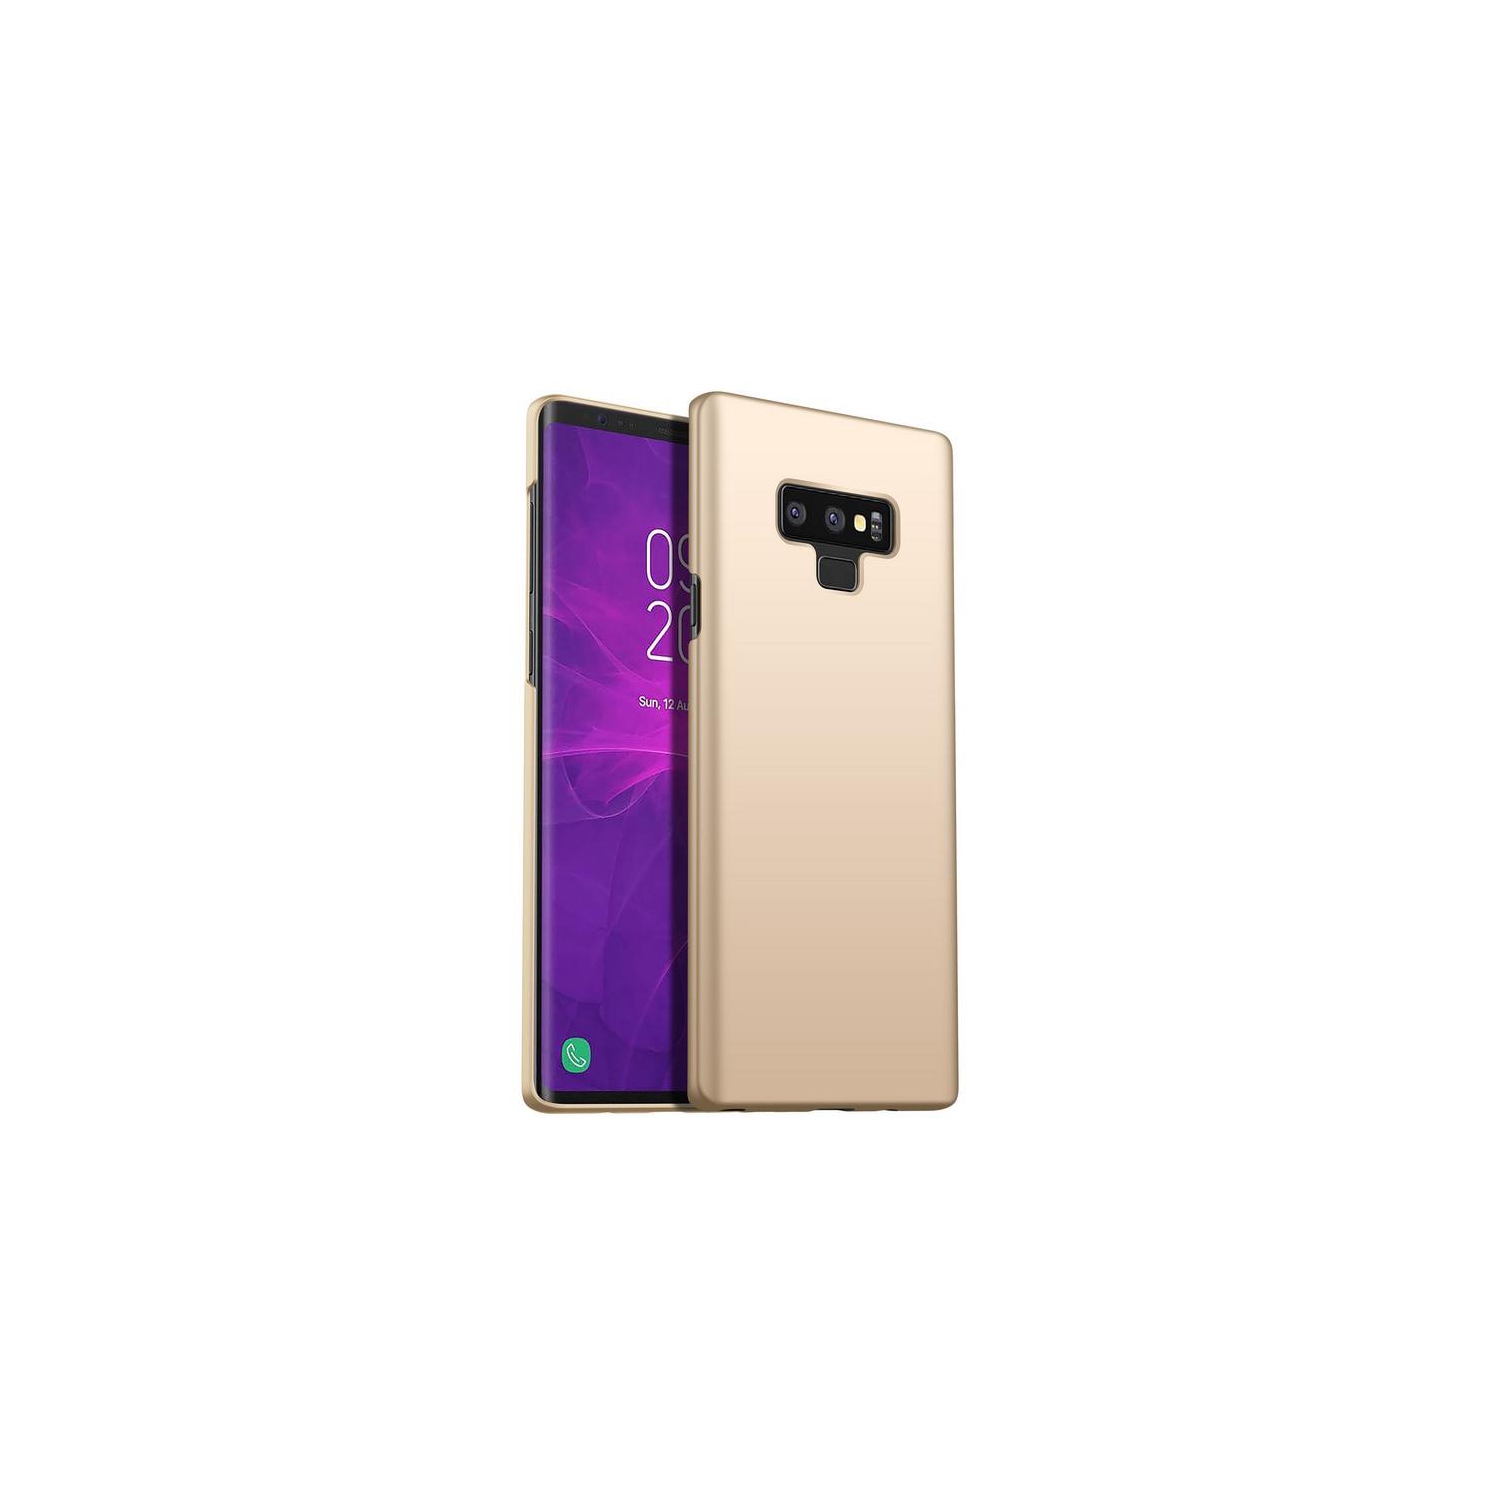 PANDACO Hard Shell Gold Case for Samsung Galaxy Note 9